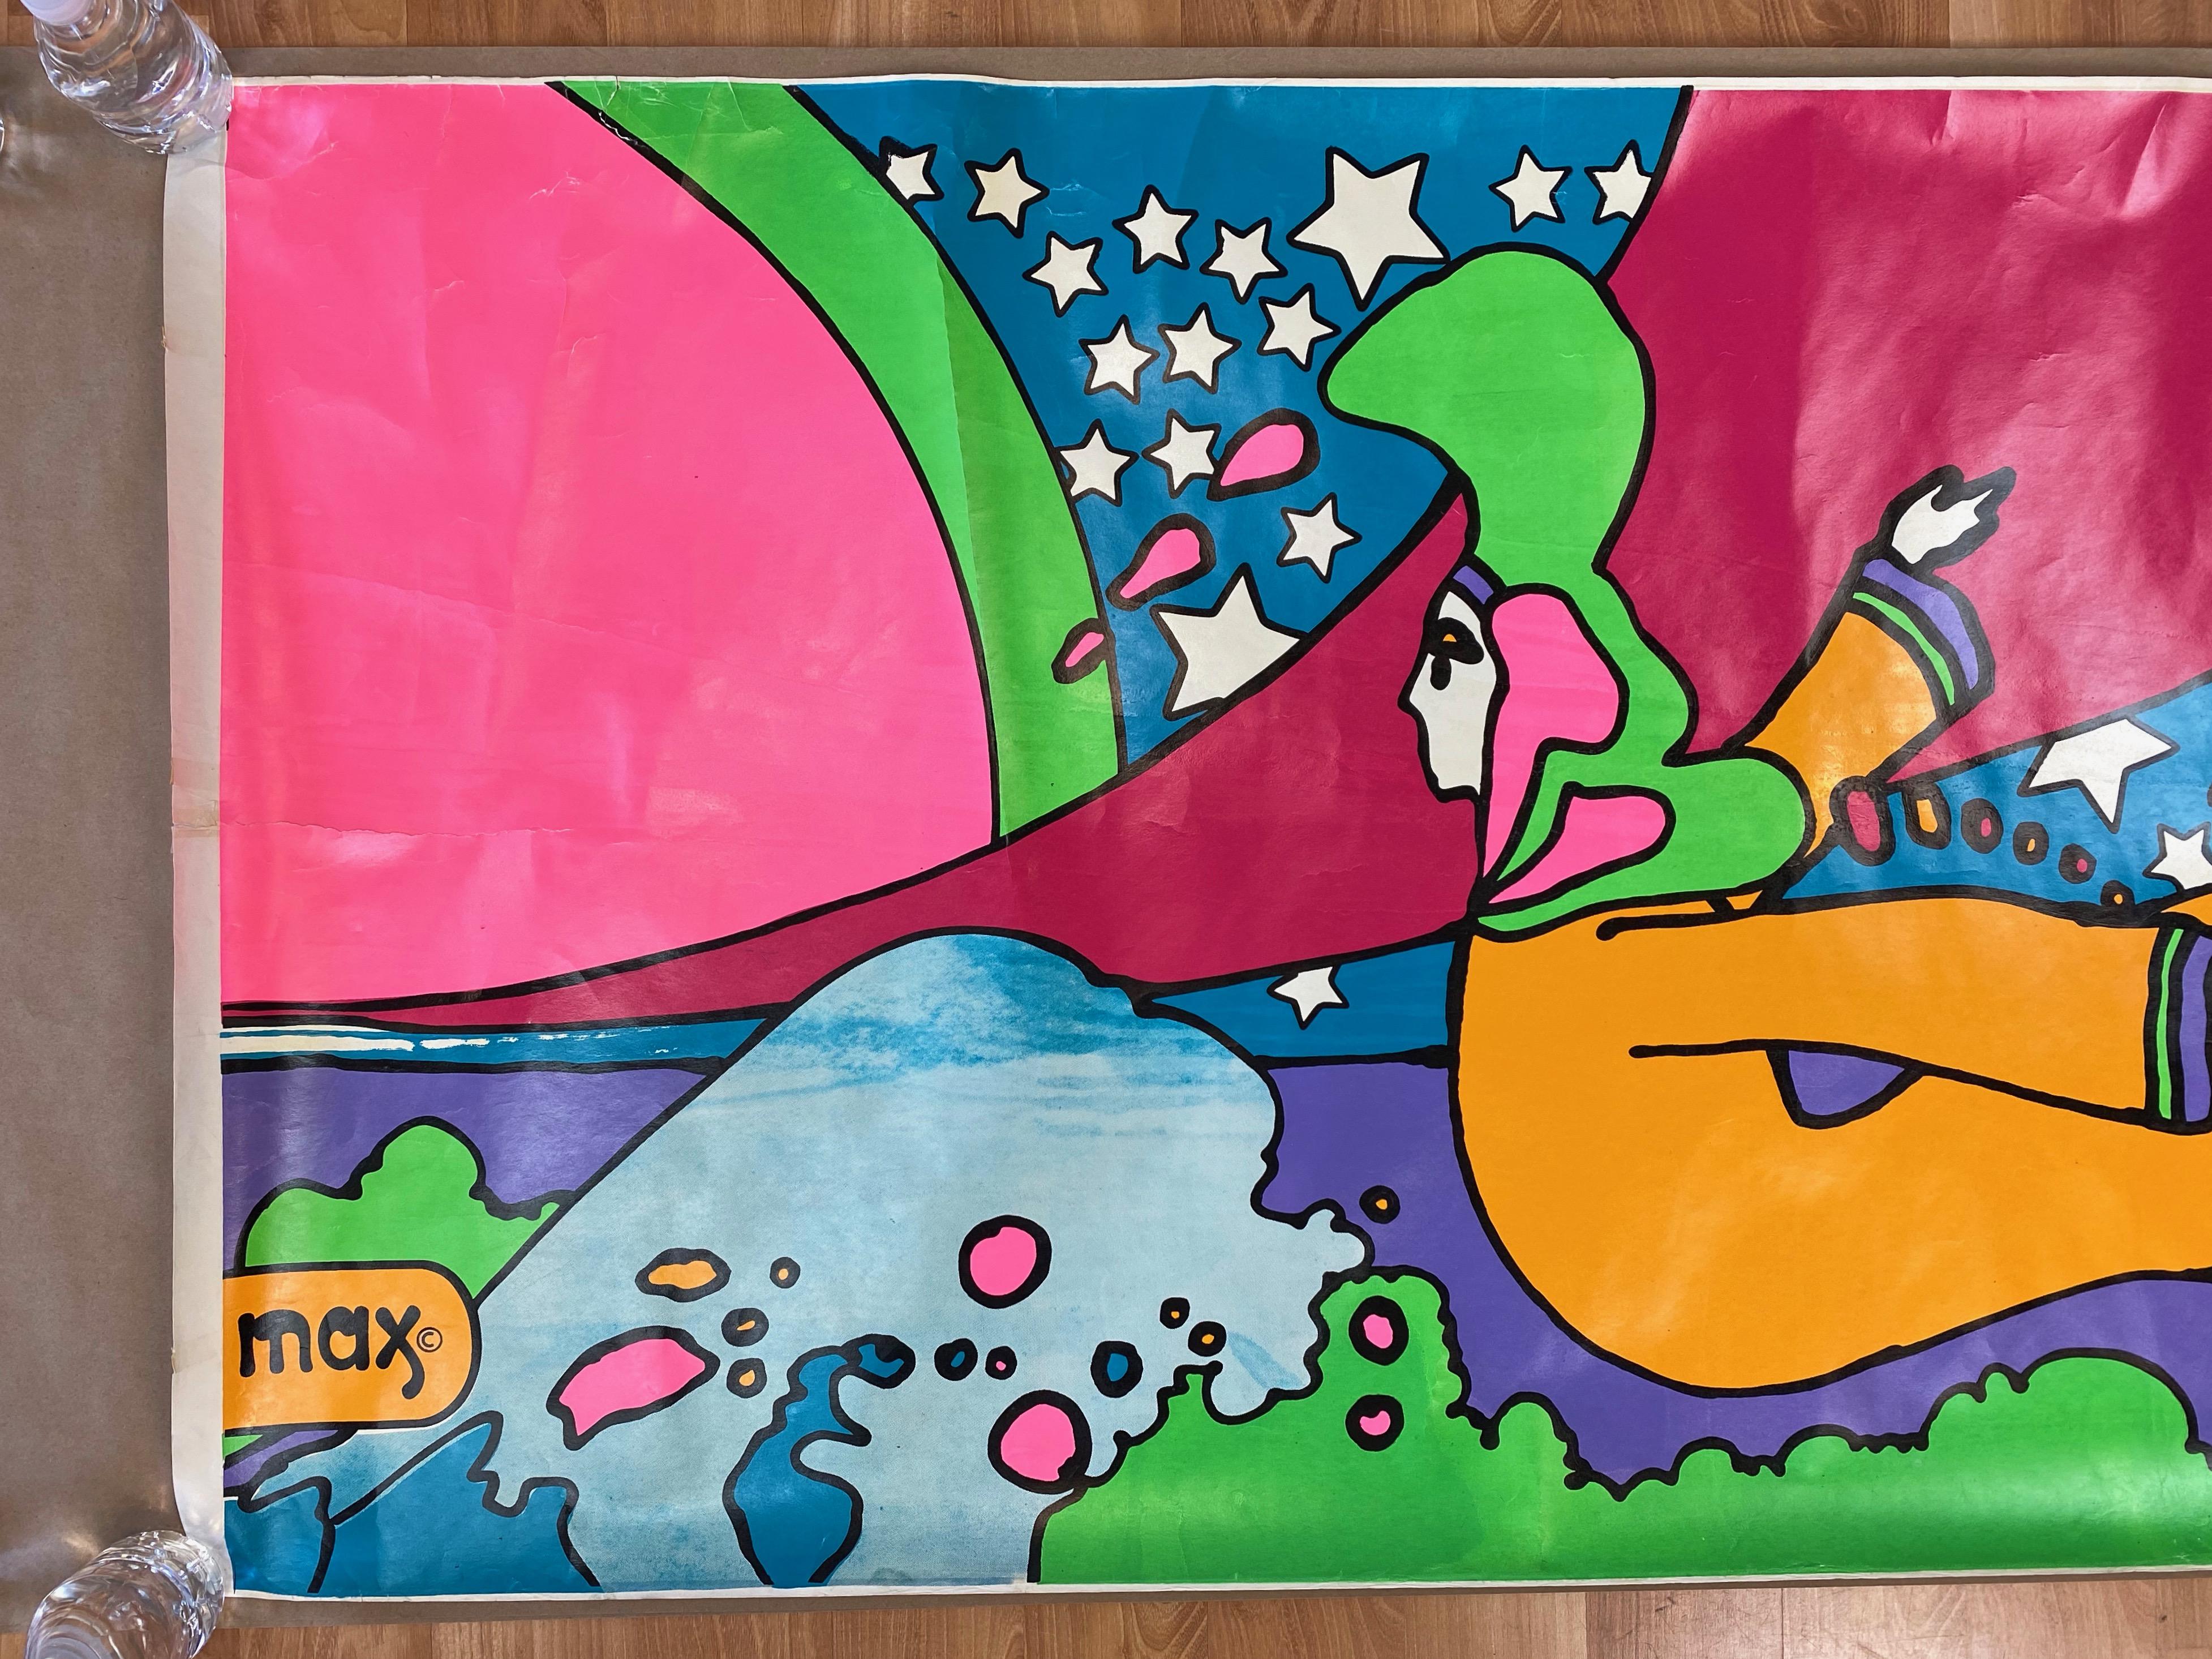 Peter Max 12-Foot-Wide Serigraph for 1970 de Young Museum Solo Exhibition ‘B’ For Sale 7